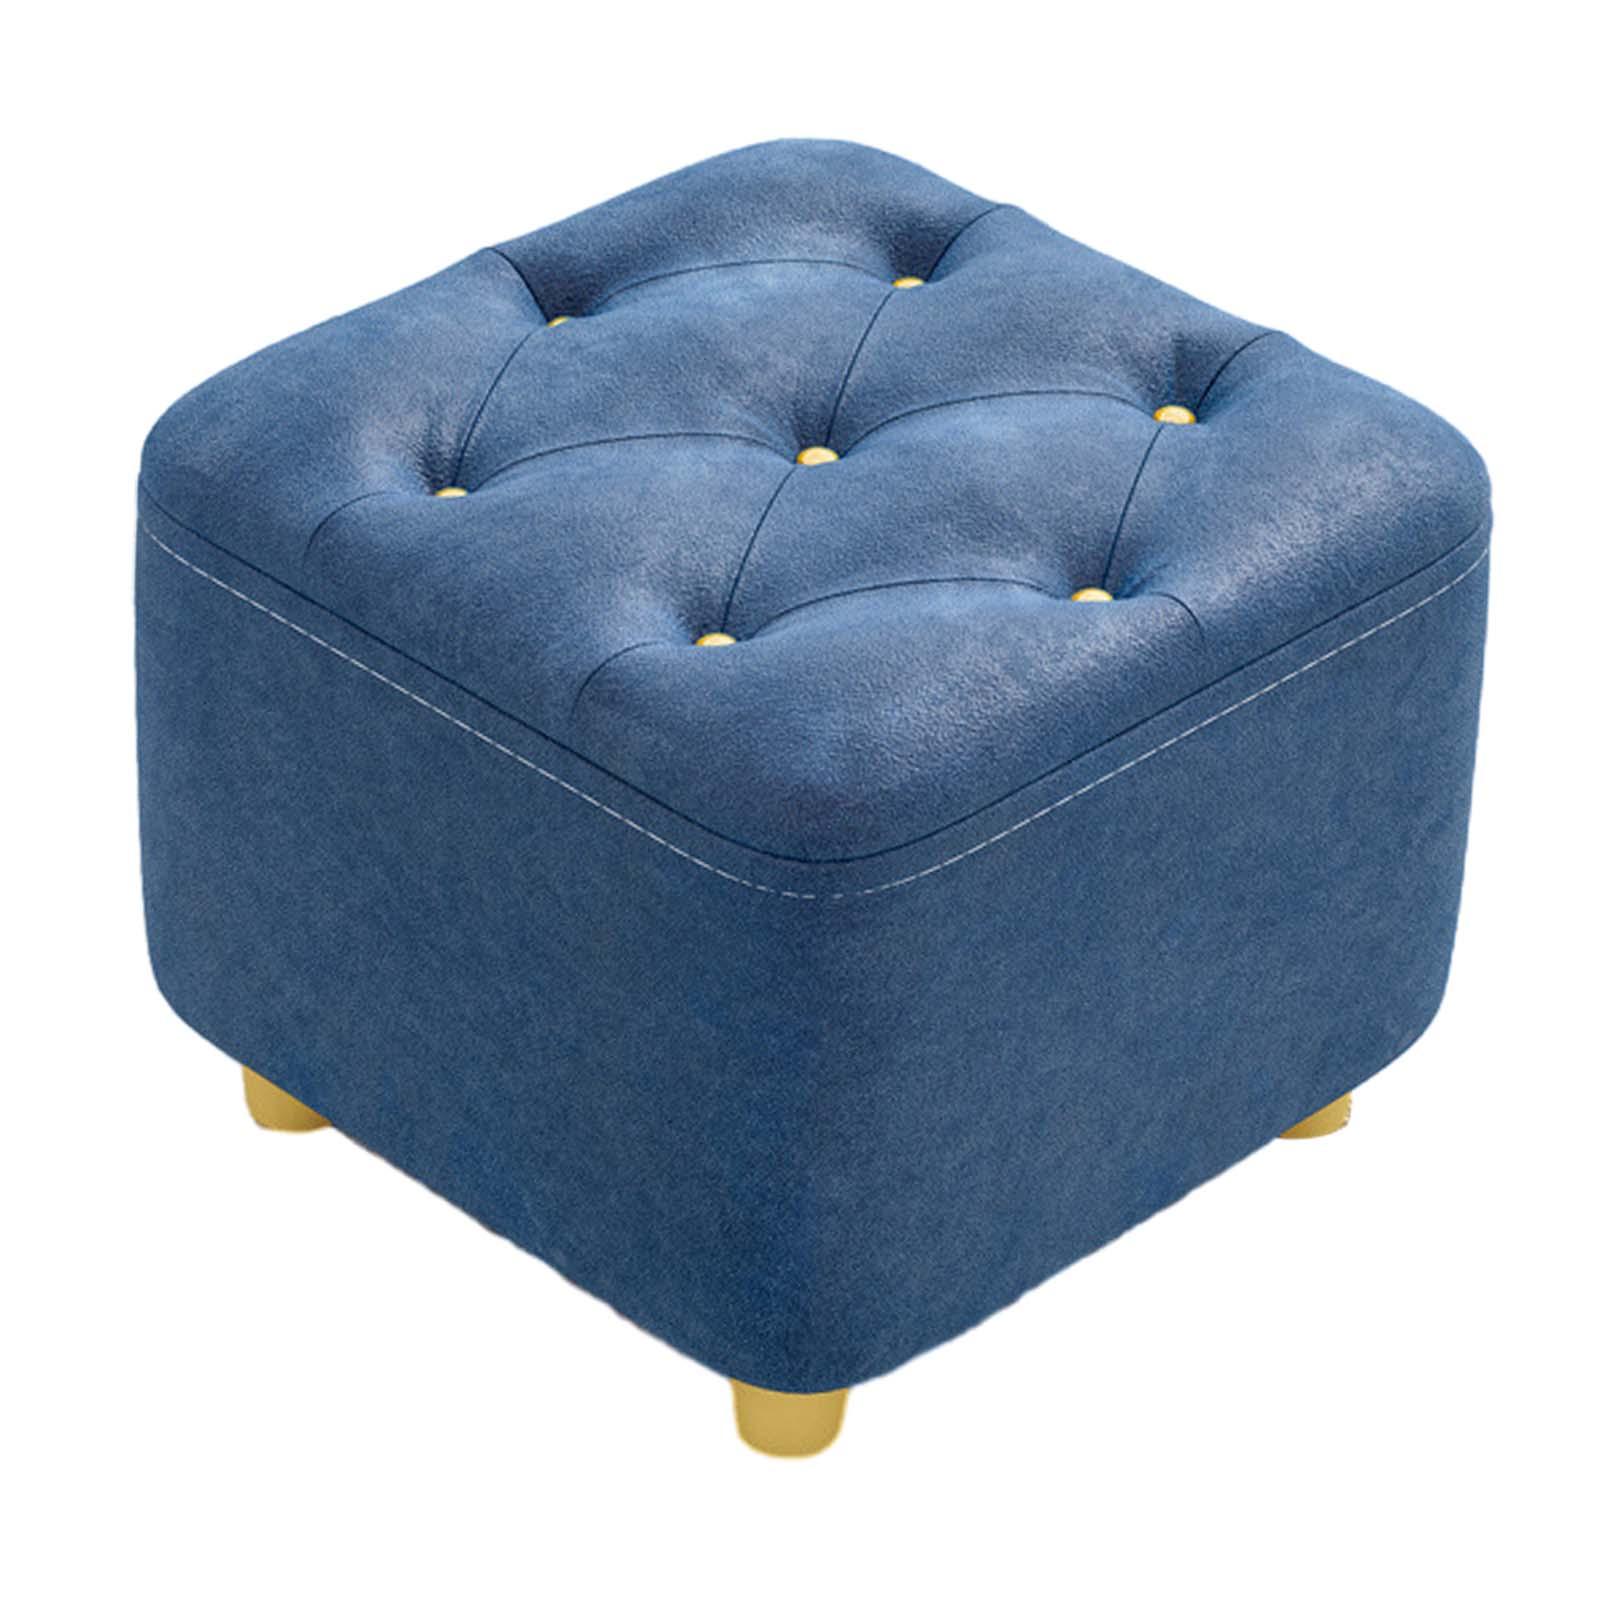 Square Footstool Foot Stool Comfortable Stepstool Creative Ottoman Stool Footrest for Living Room Dressing Room Bedroom Couch dark blue - image 3 of 8